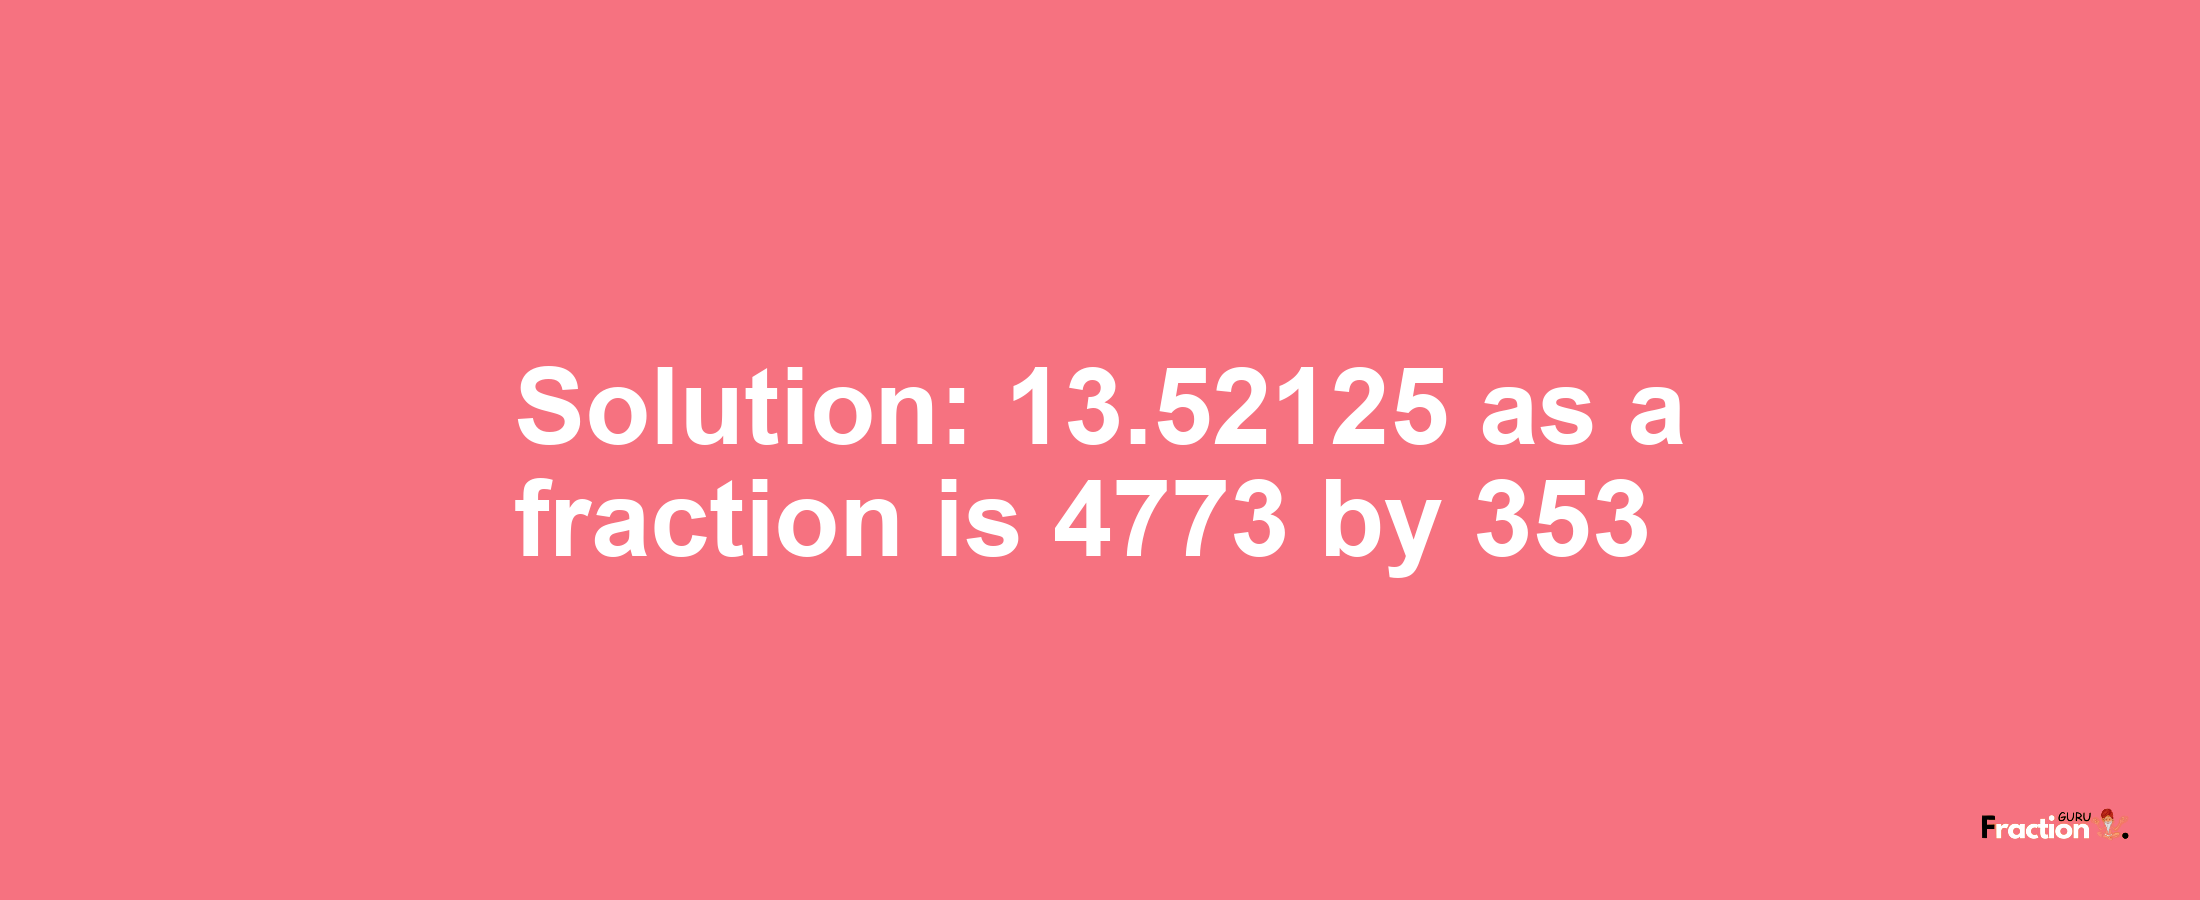 Solution:13.52125 as a fraction is 4773/353